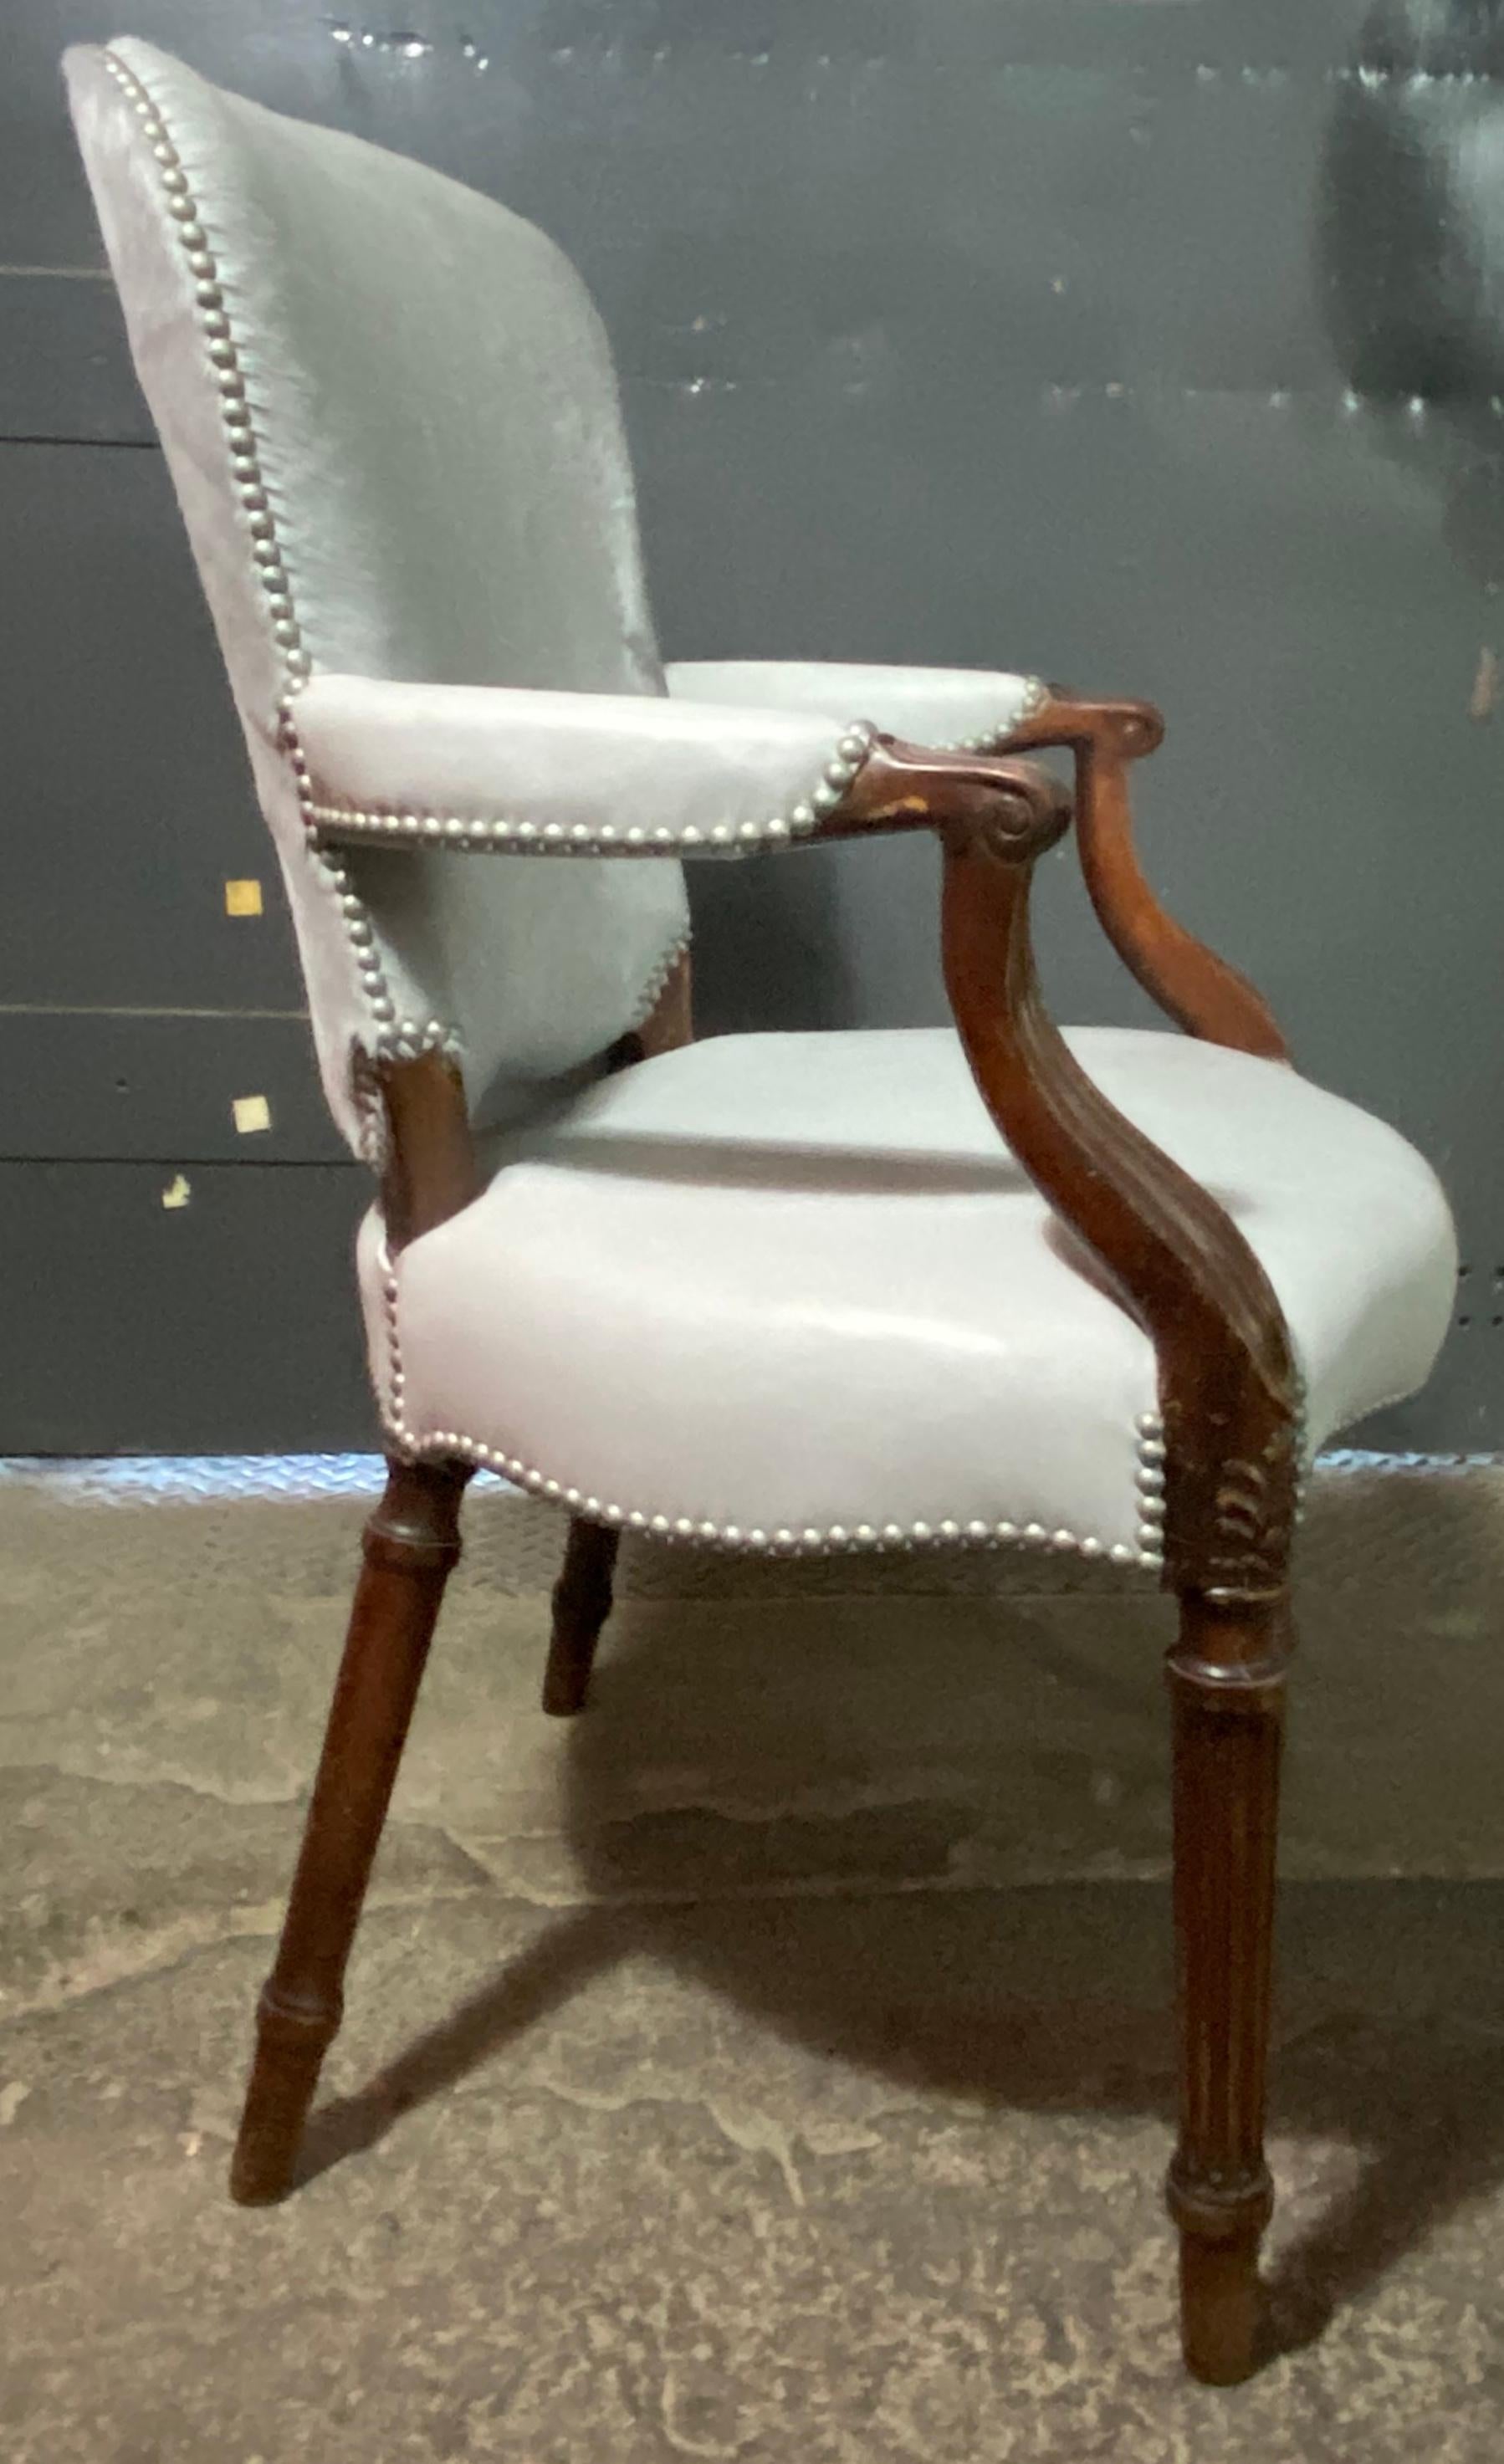 Mahogany Chic Fauteuil in a Soft Gray Leather Seat and Matching Hair-on-Hide Back For Sale